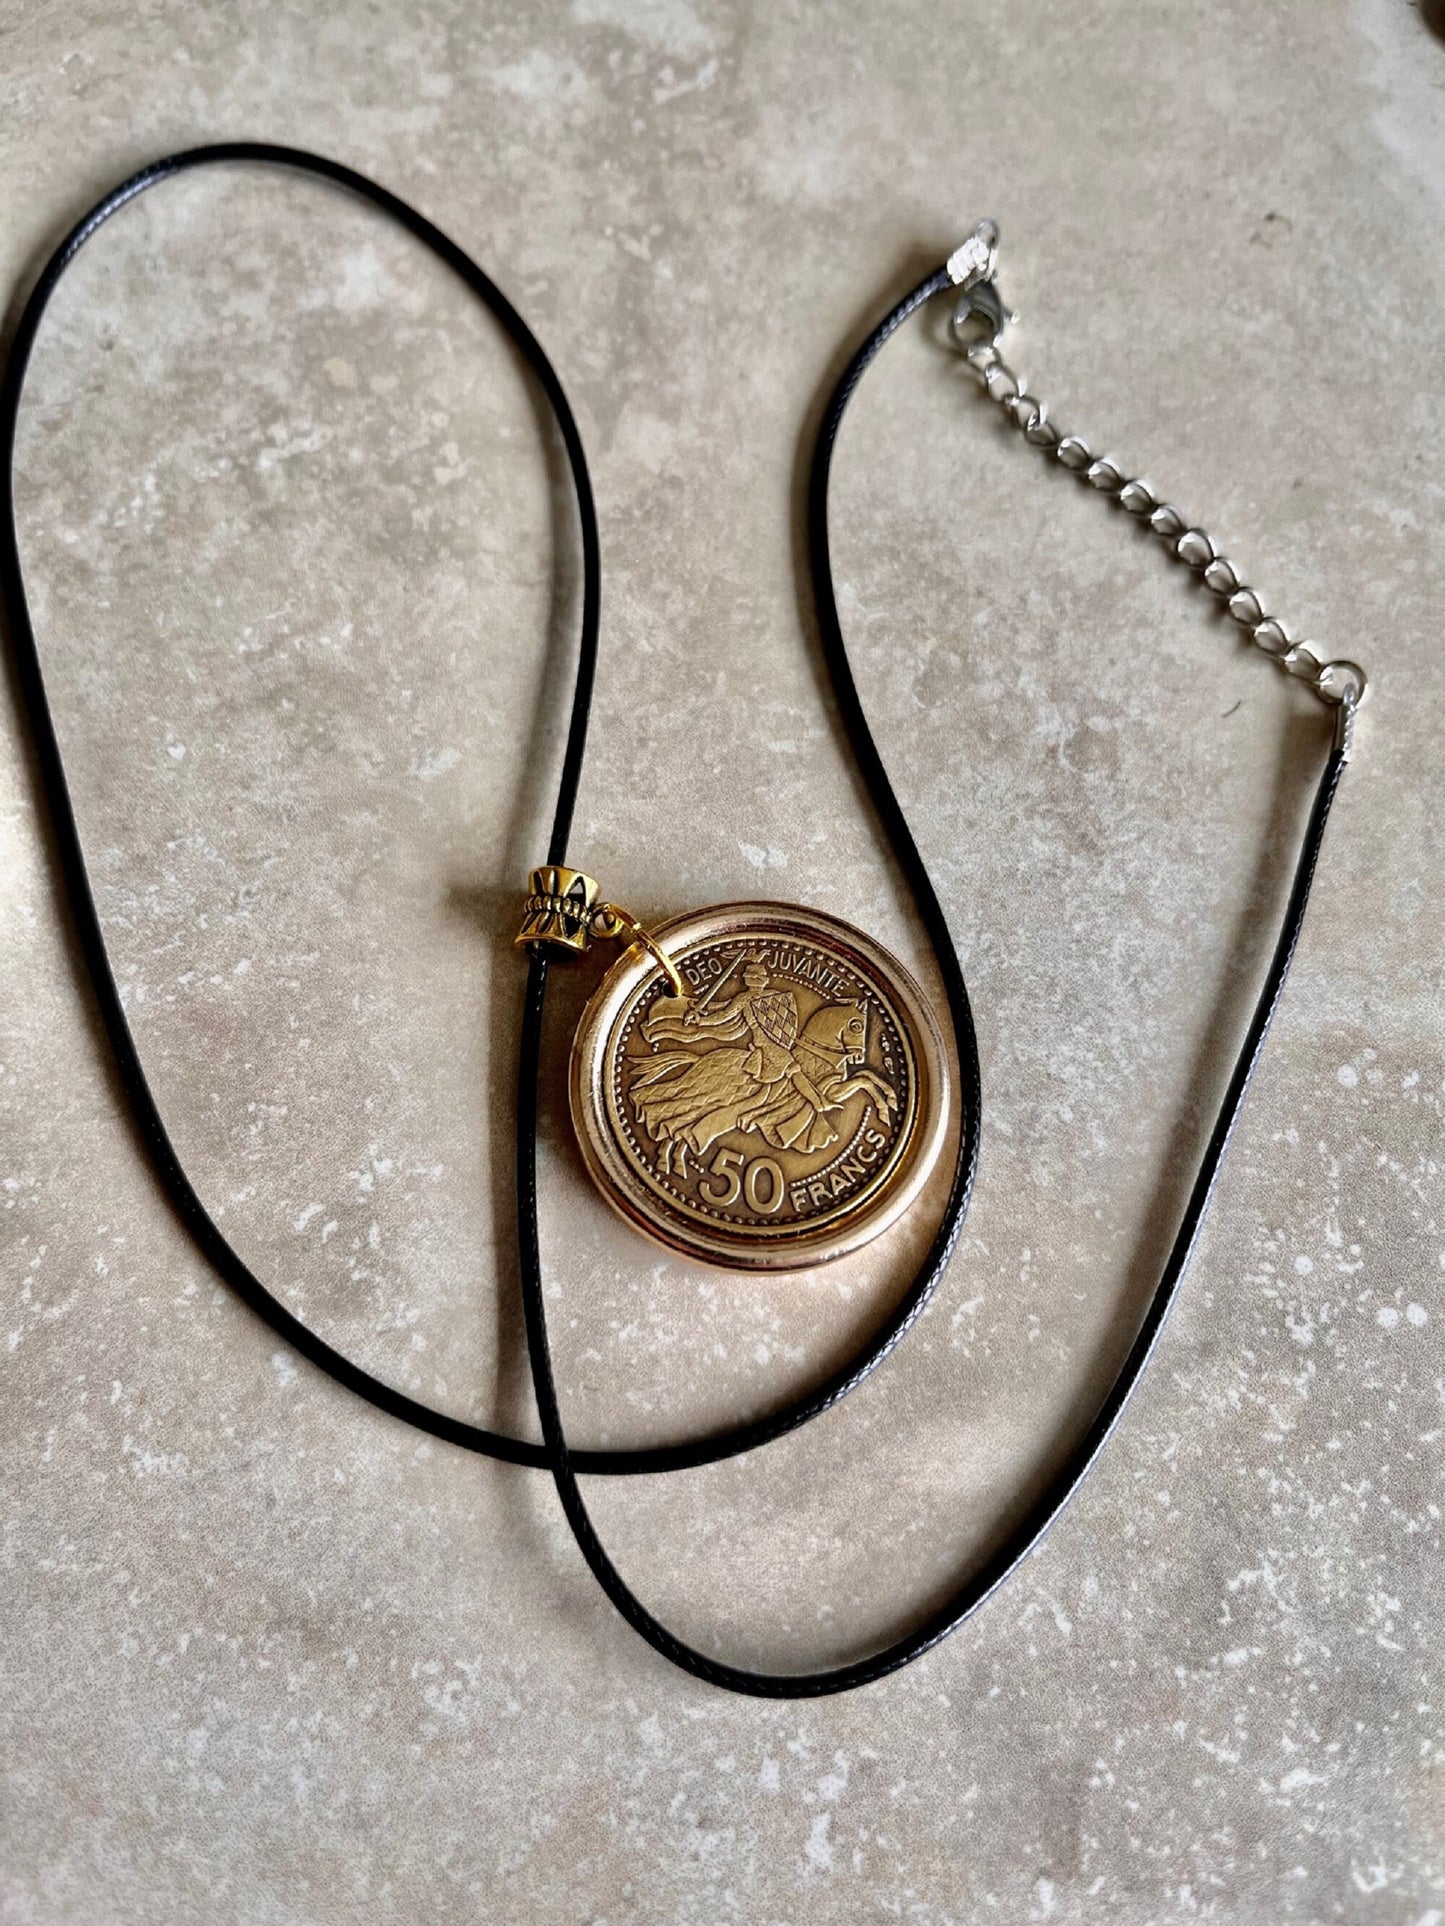 Monaco Coin Pendant Necklace 50 Francs, Prince Rainier III Personal Vintage Handmade Jewelry Gift Friend Charm Him Her World Coin Collector